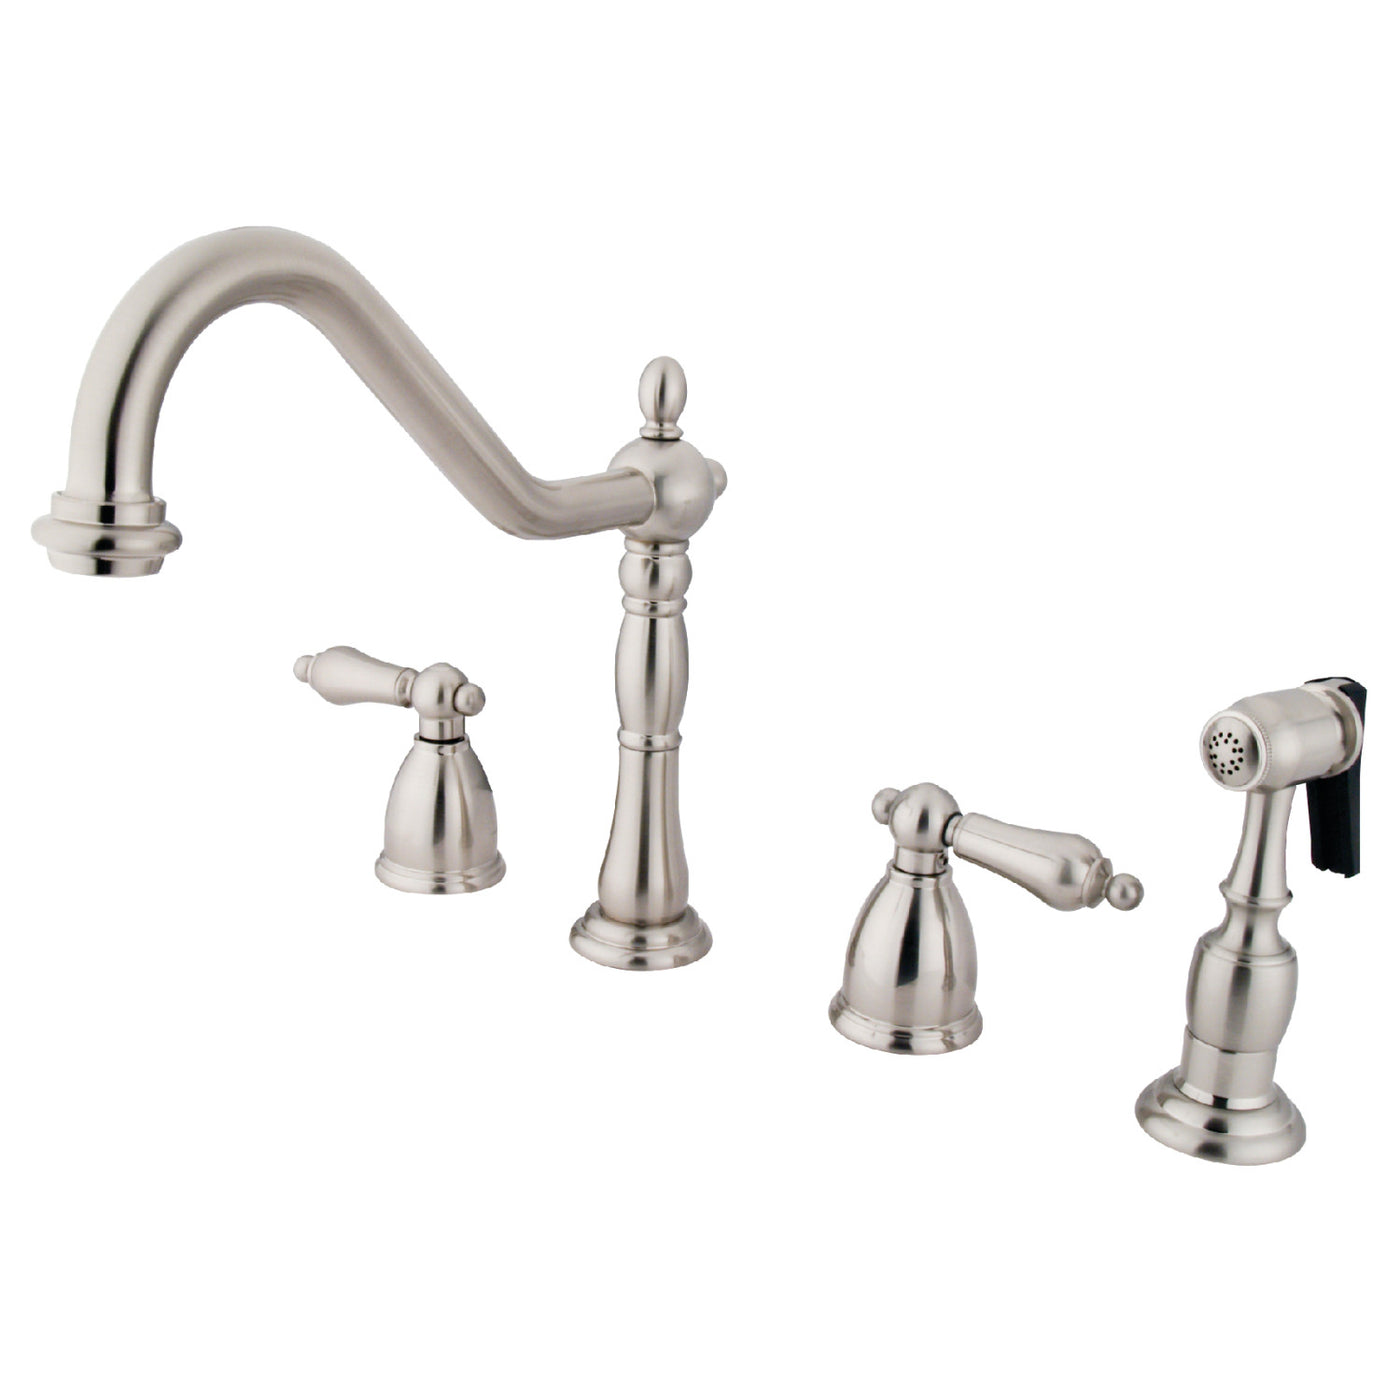 Elements of Design EB1798ALBS Widespread Kitchen Faucet with Brass Sprayer, Brushed Nickel